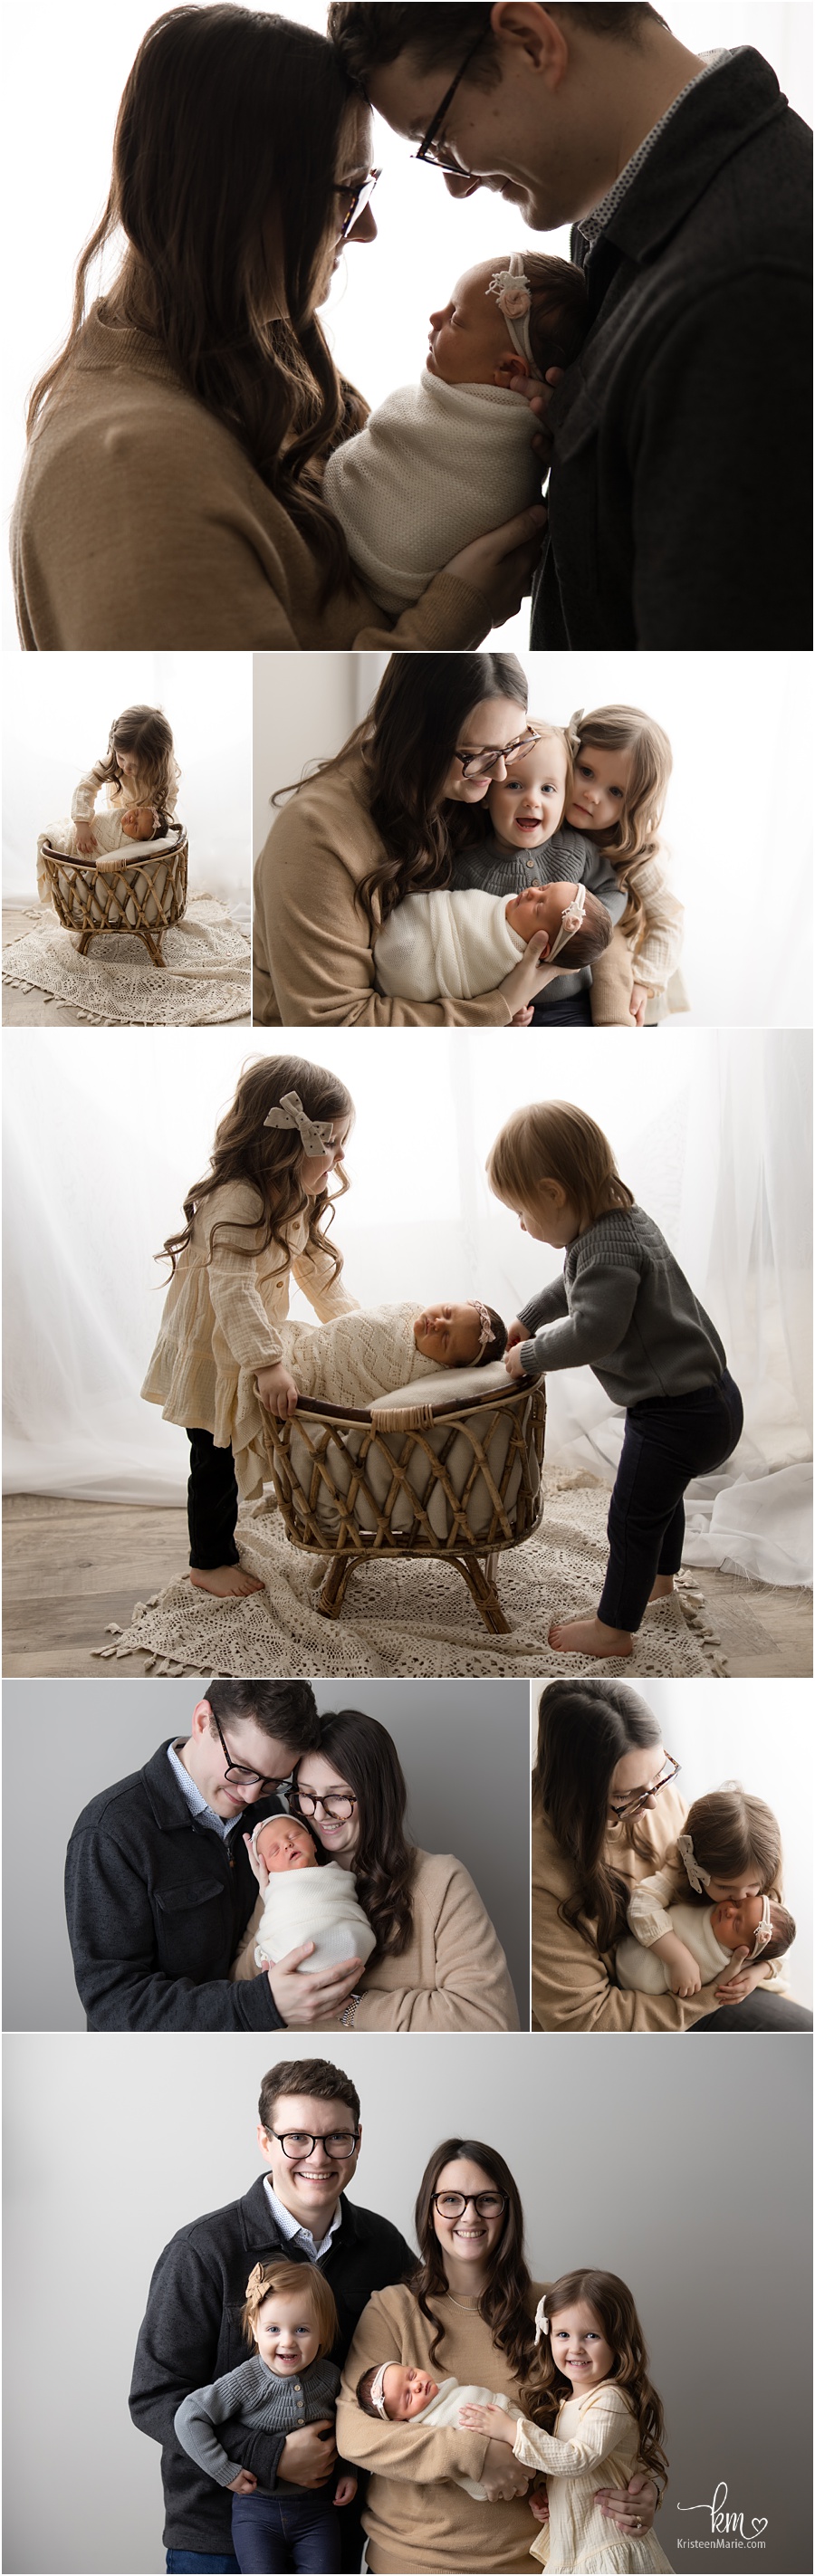 family with three girl - Indianapolis newborn and family photography - family of 5